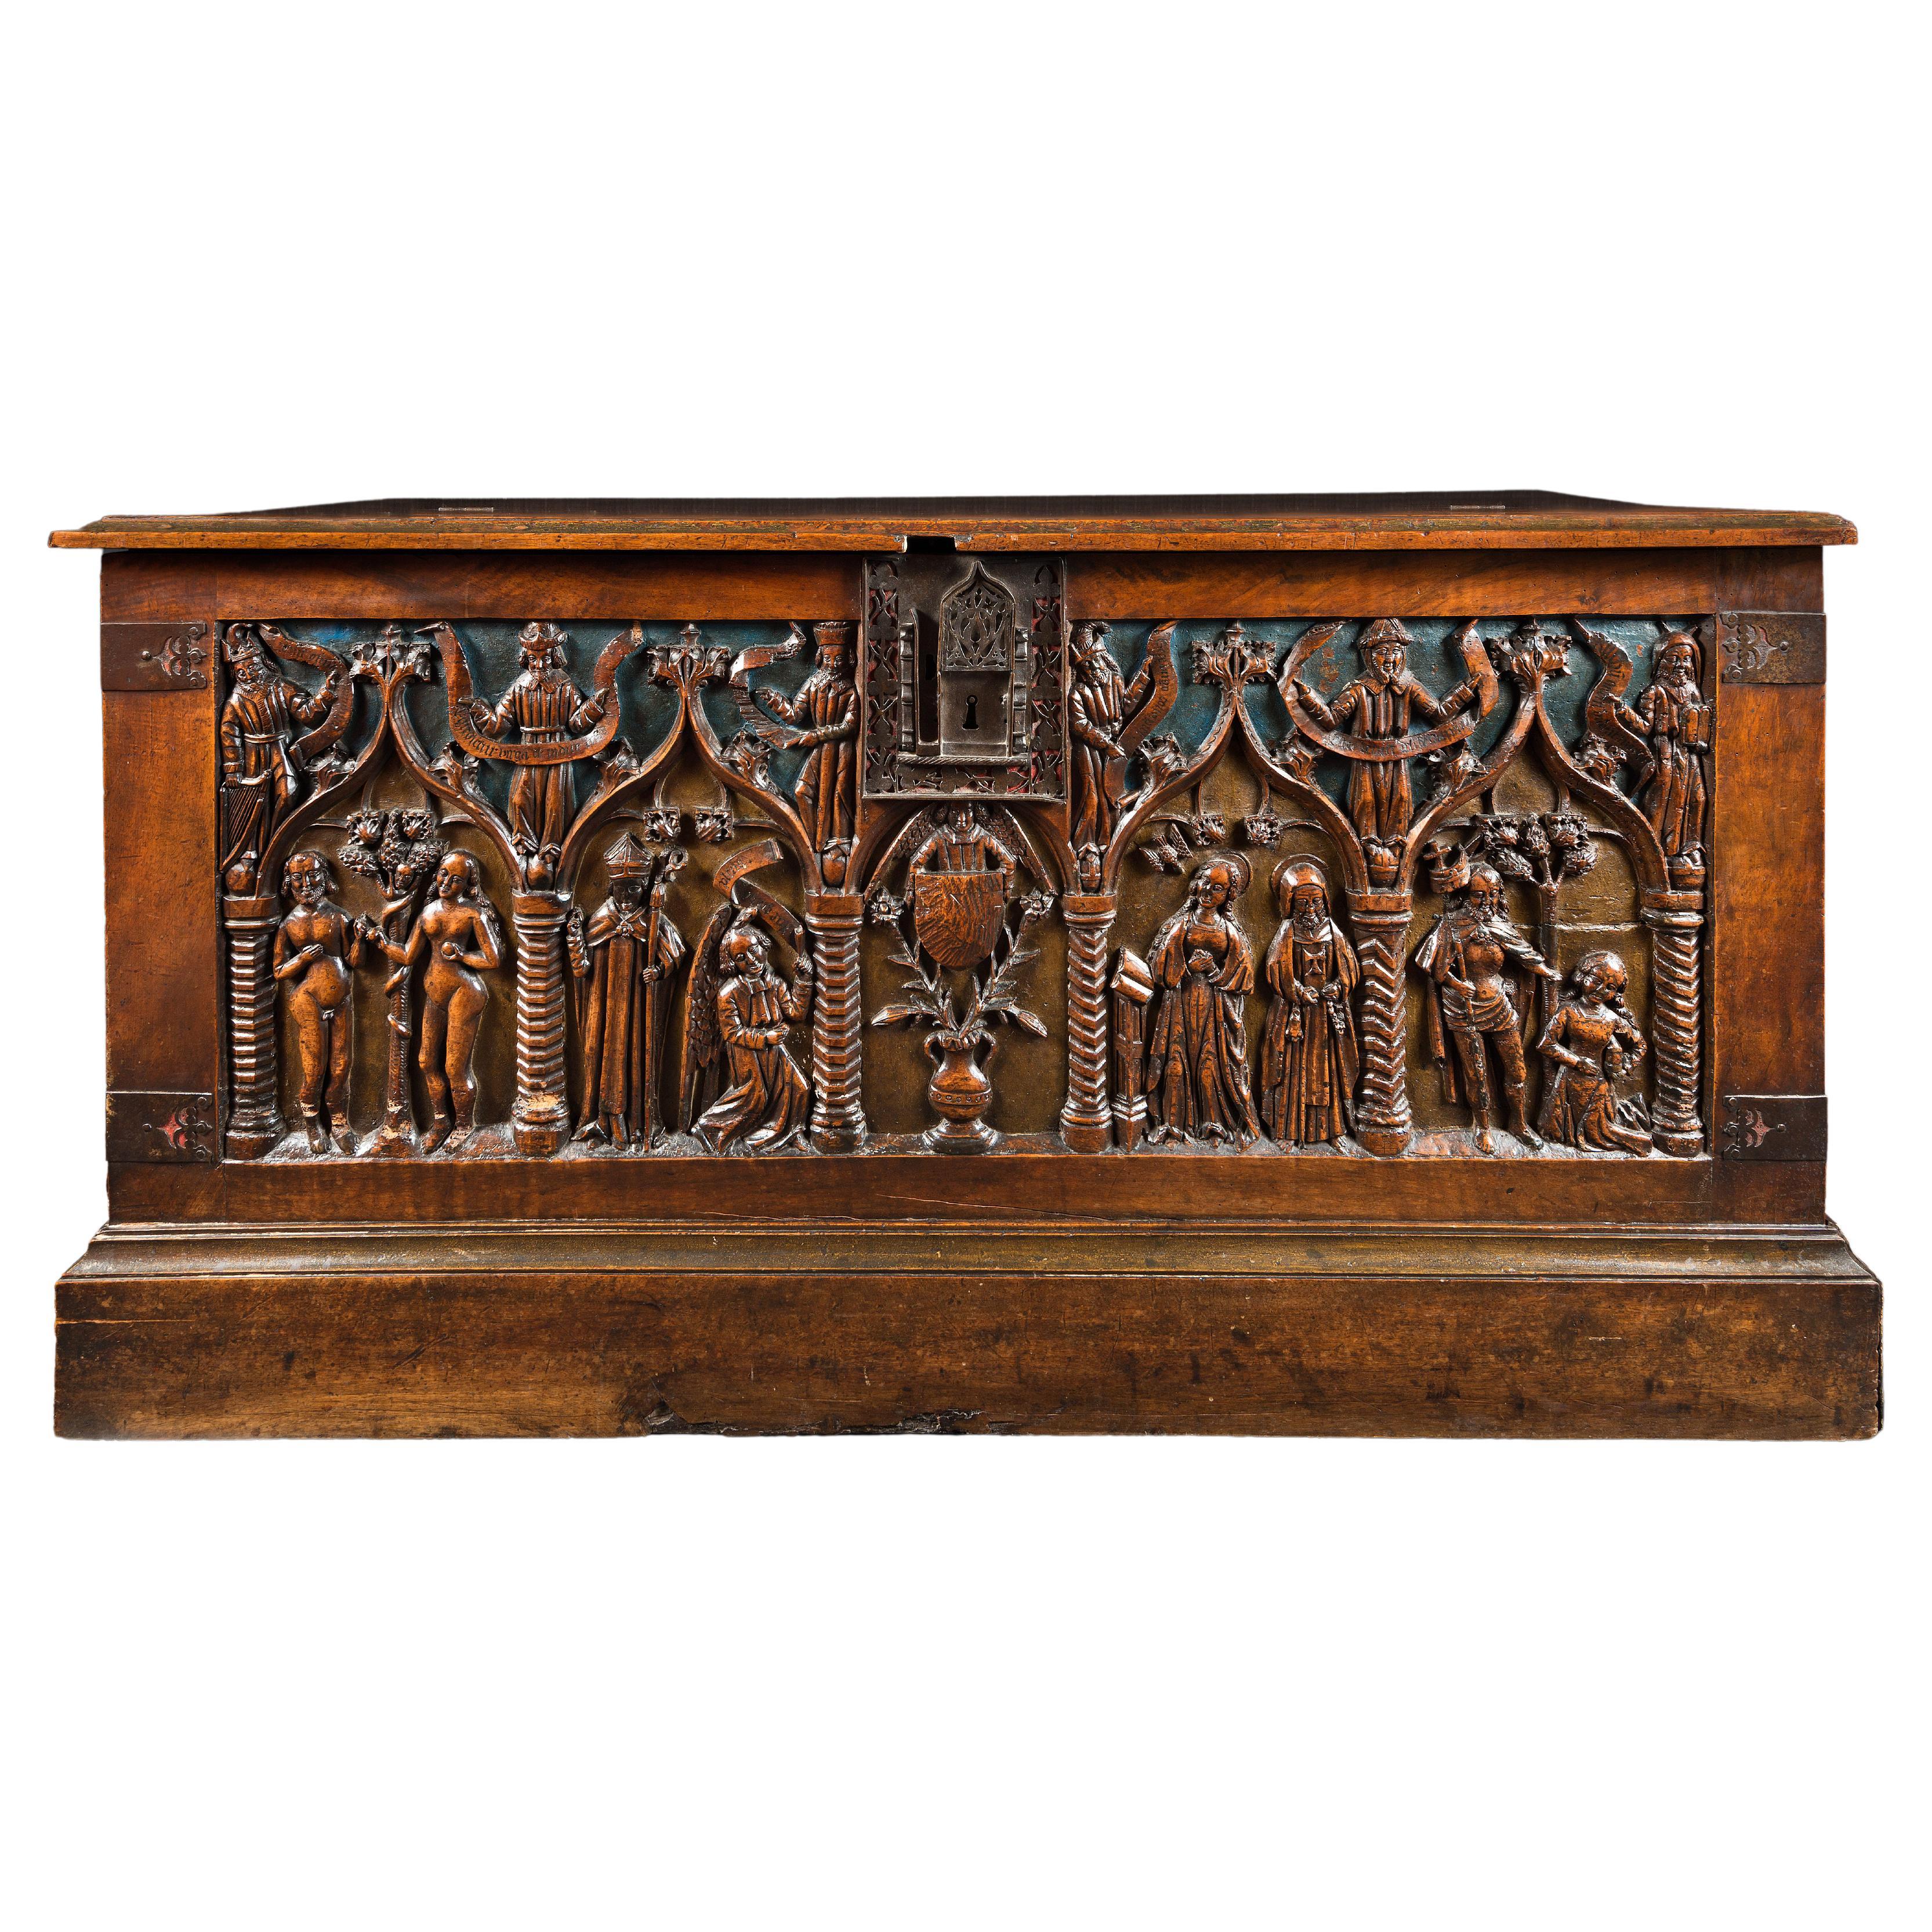 French Carved and Polychromed Walnut Chest, Louis XII